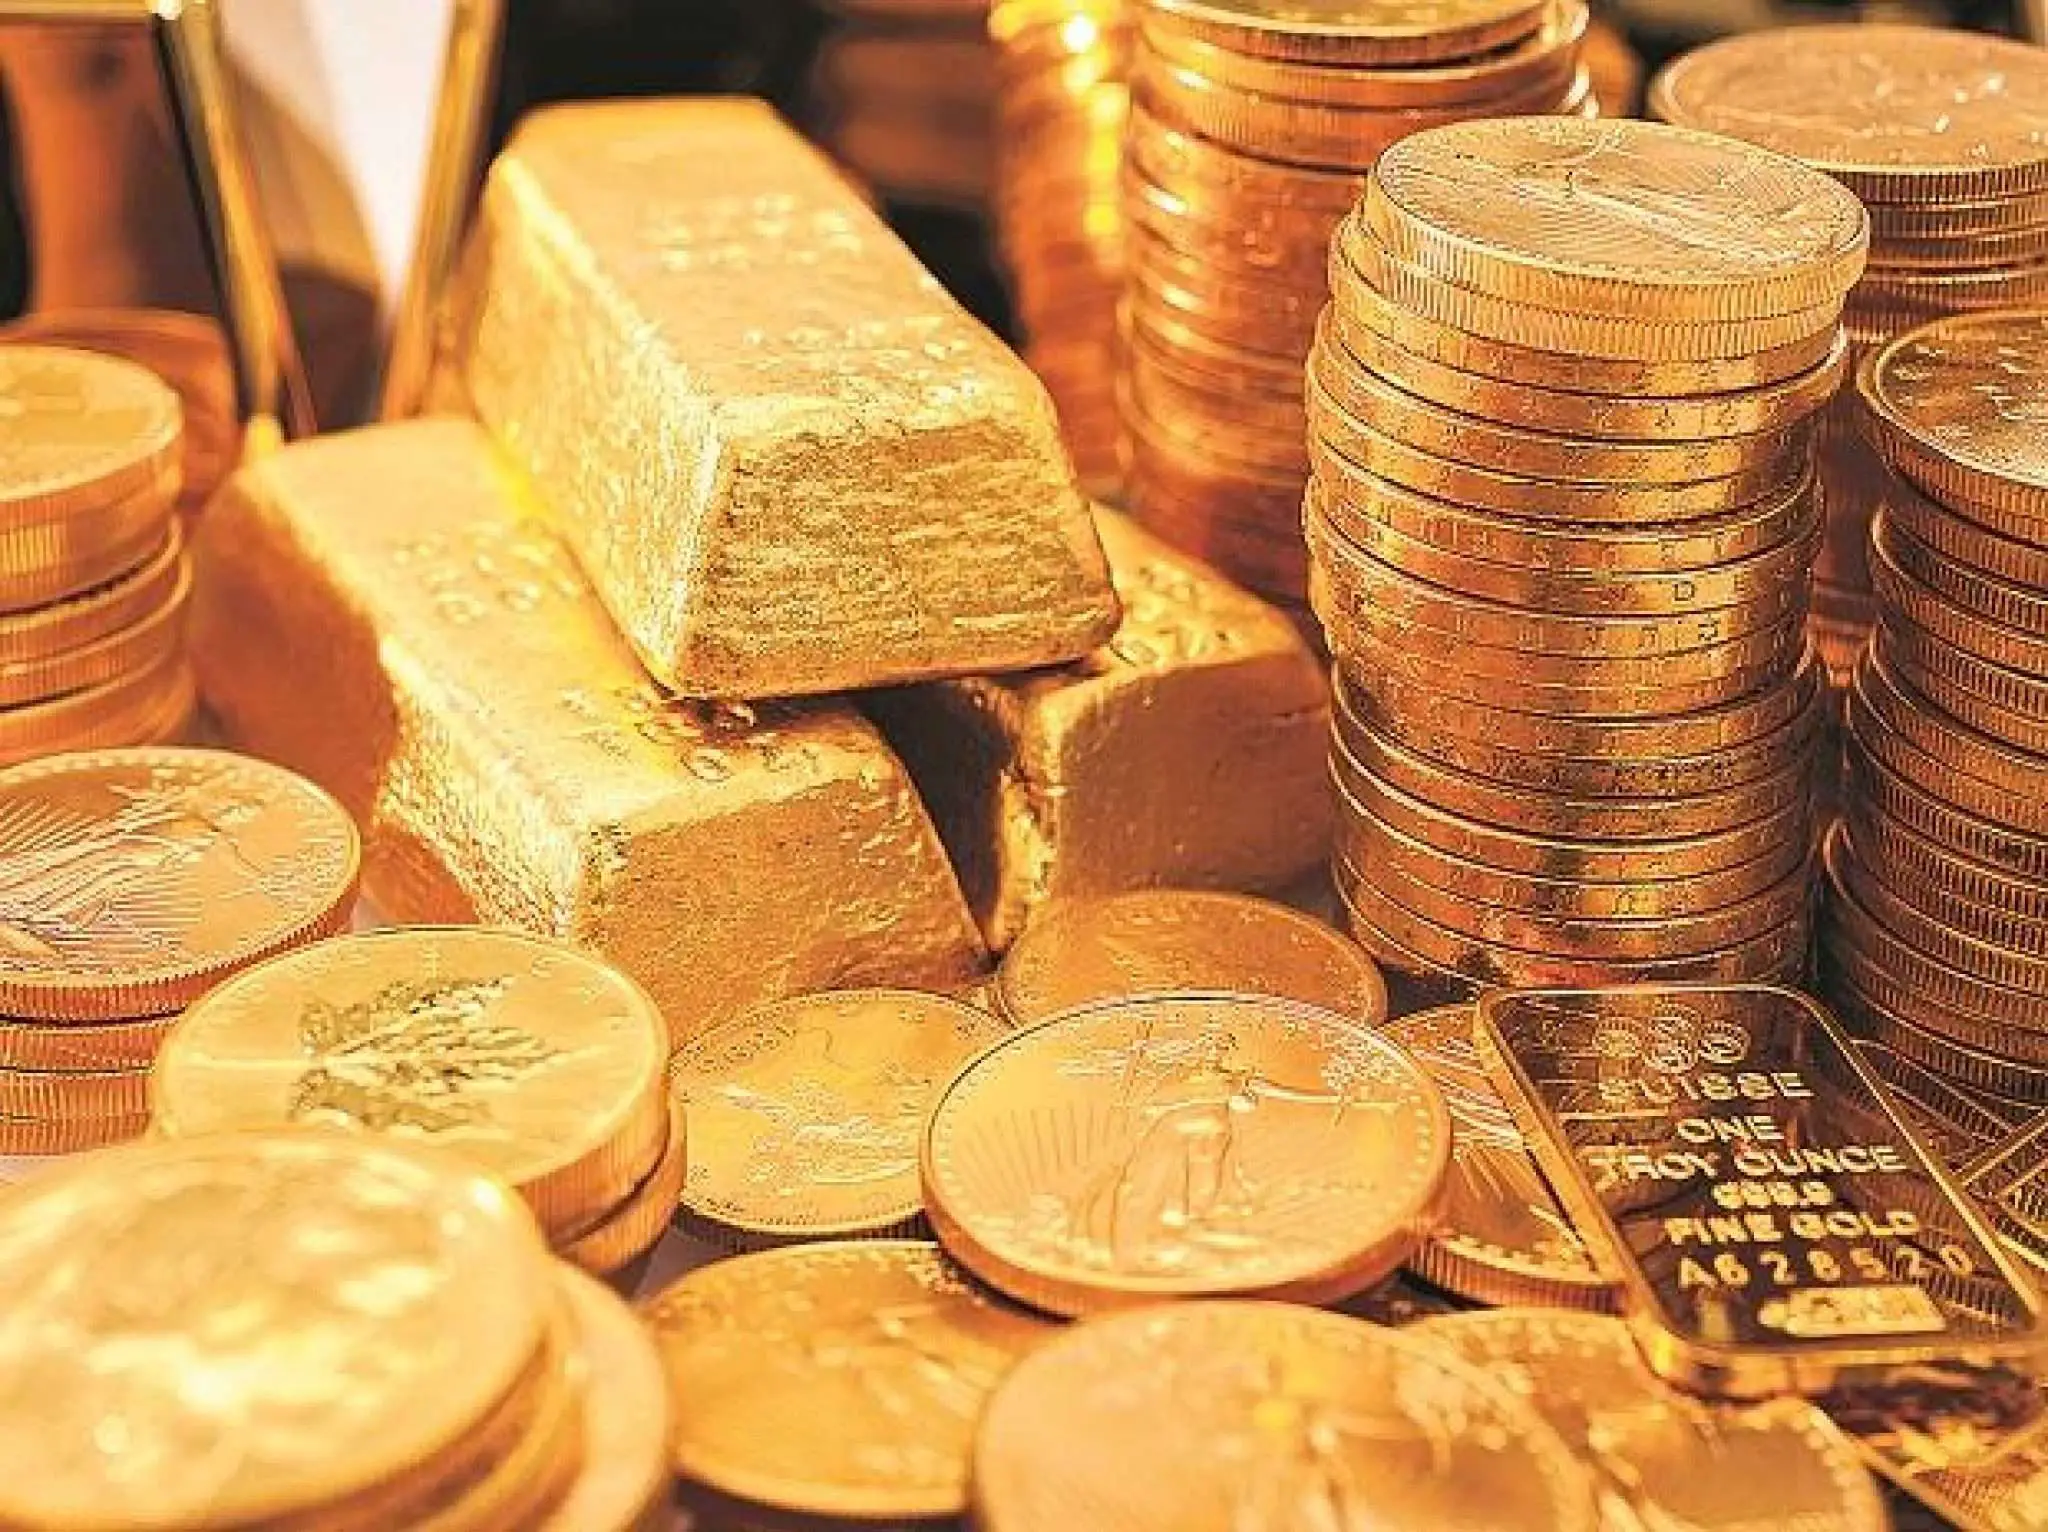 Top 3 Gold Mining Stocks to Buy in 2020